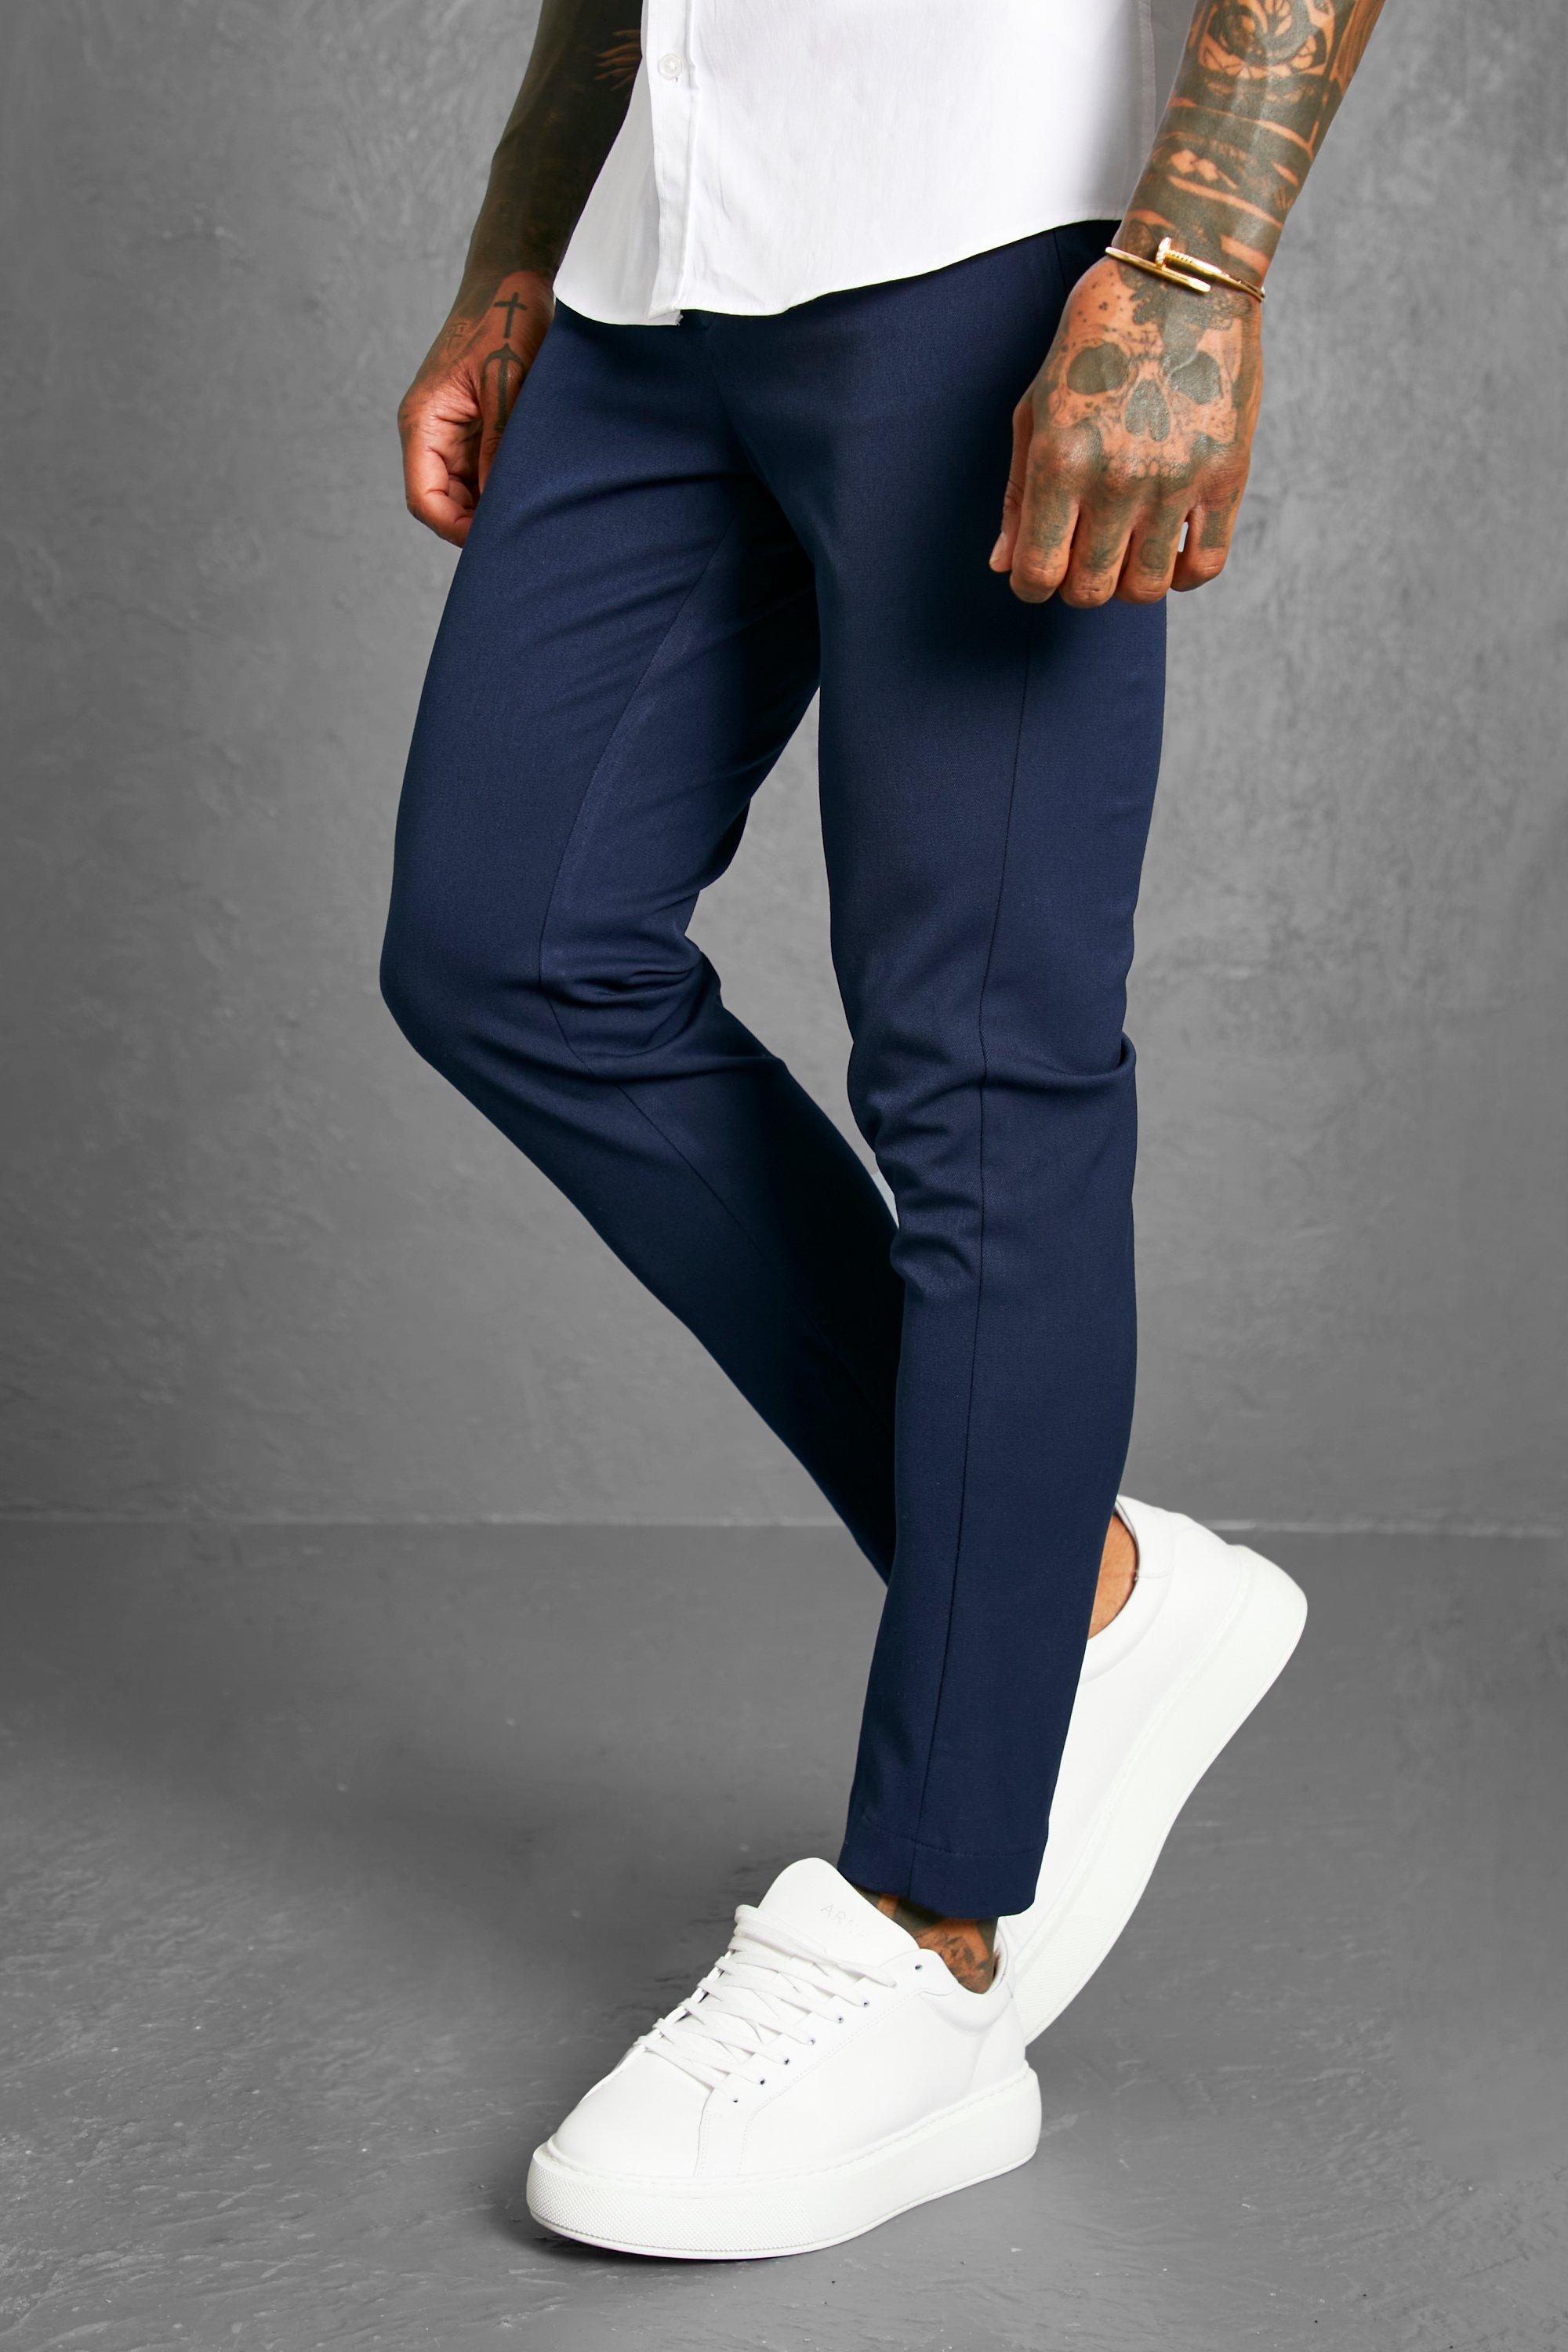 Smitty Tapered Fit 4-Way Stretch Pants